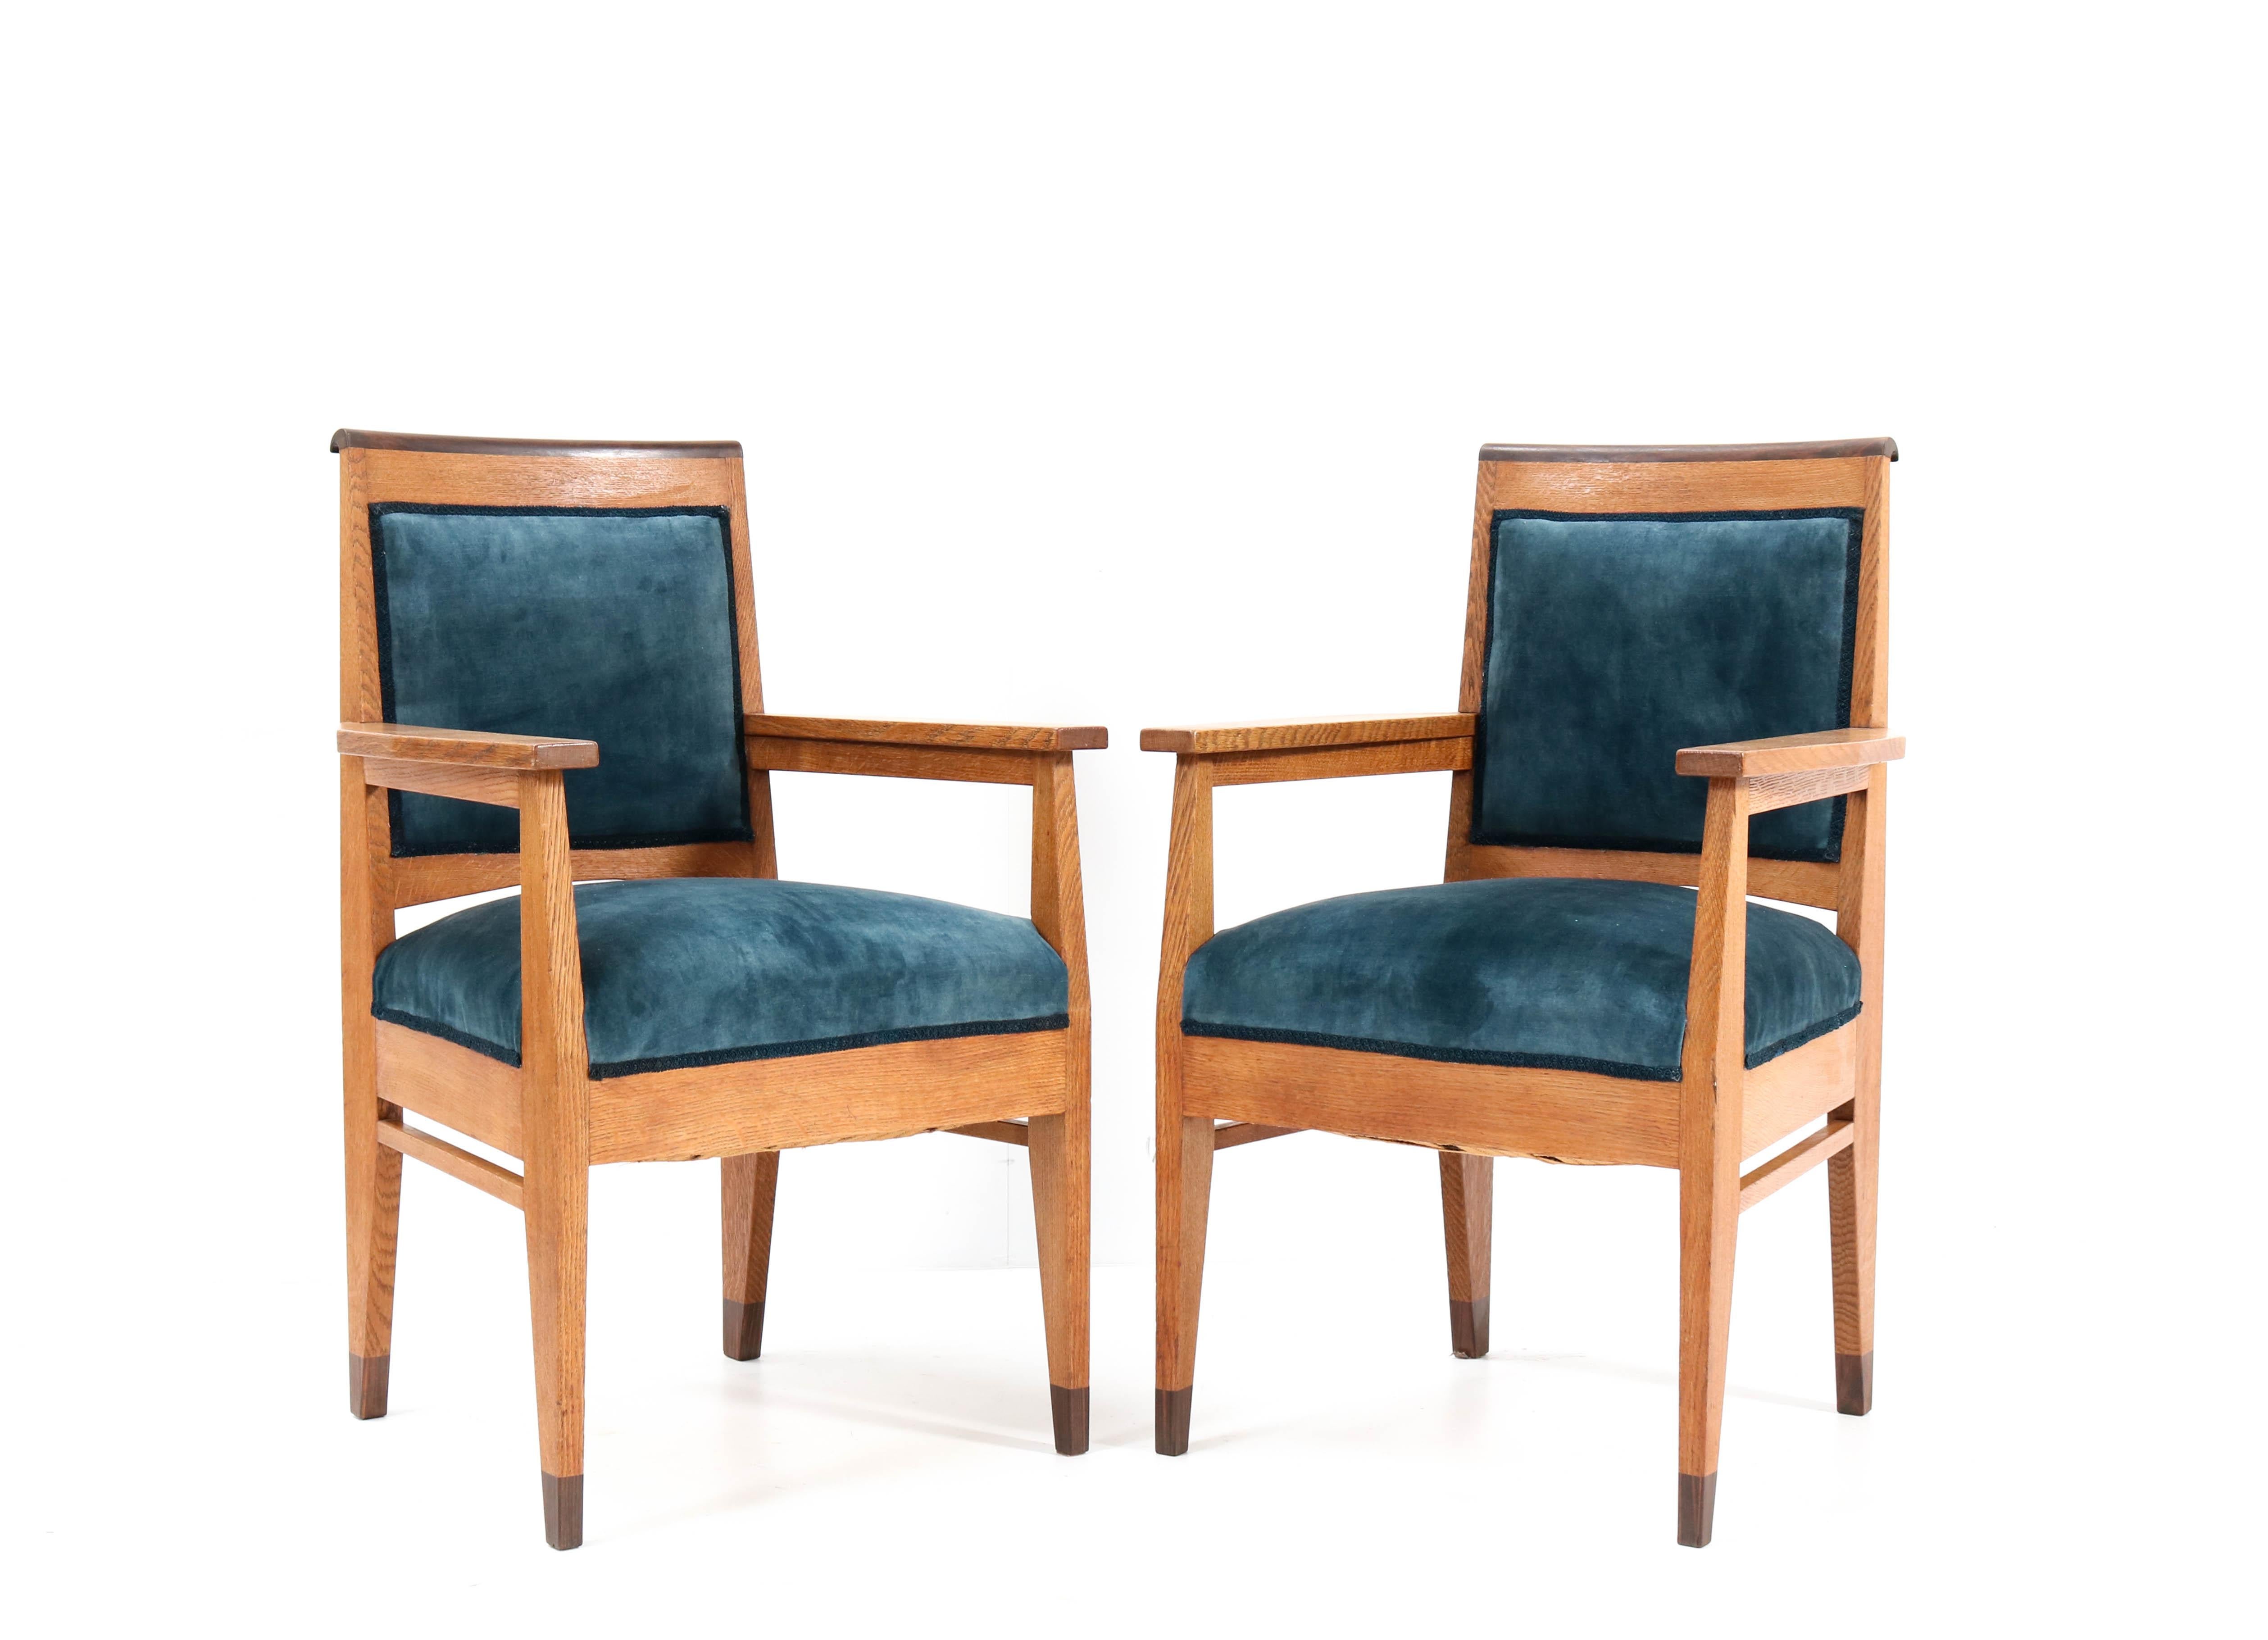 Magnificent and rare pair of Art Deco Haagse School armchairs.
Design by Anton Lucas for N.V. Meubelkunst Leiden.
Striking Dutch design from the 1920s.
Solid oak with solid ebony macassar lining on top of the chairs.
Re-upholstered with petrol